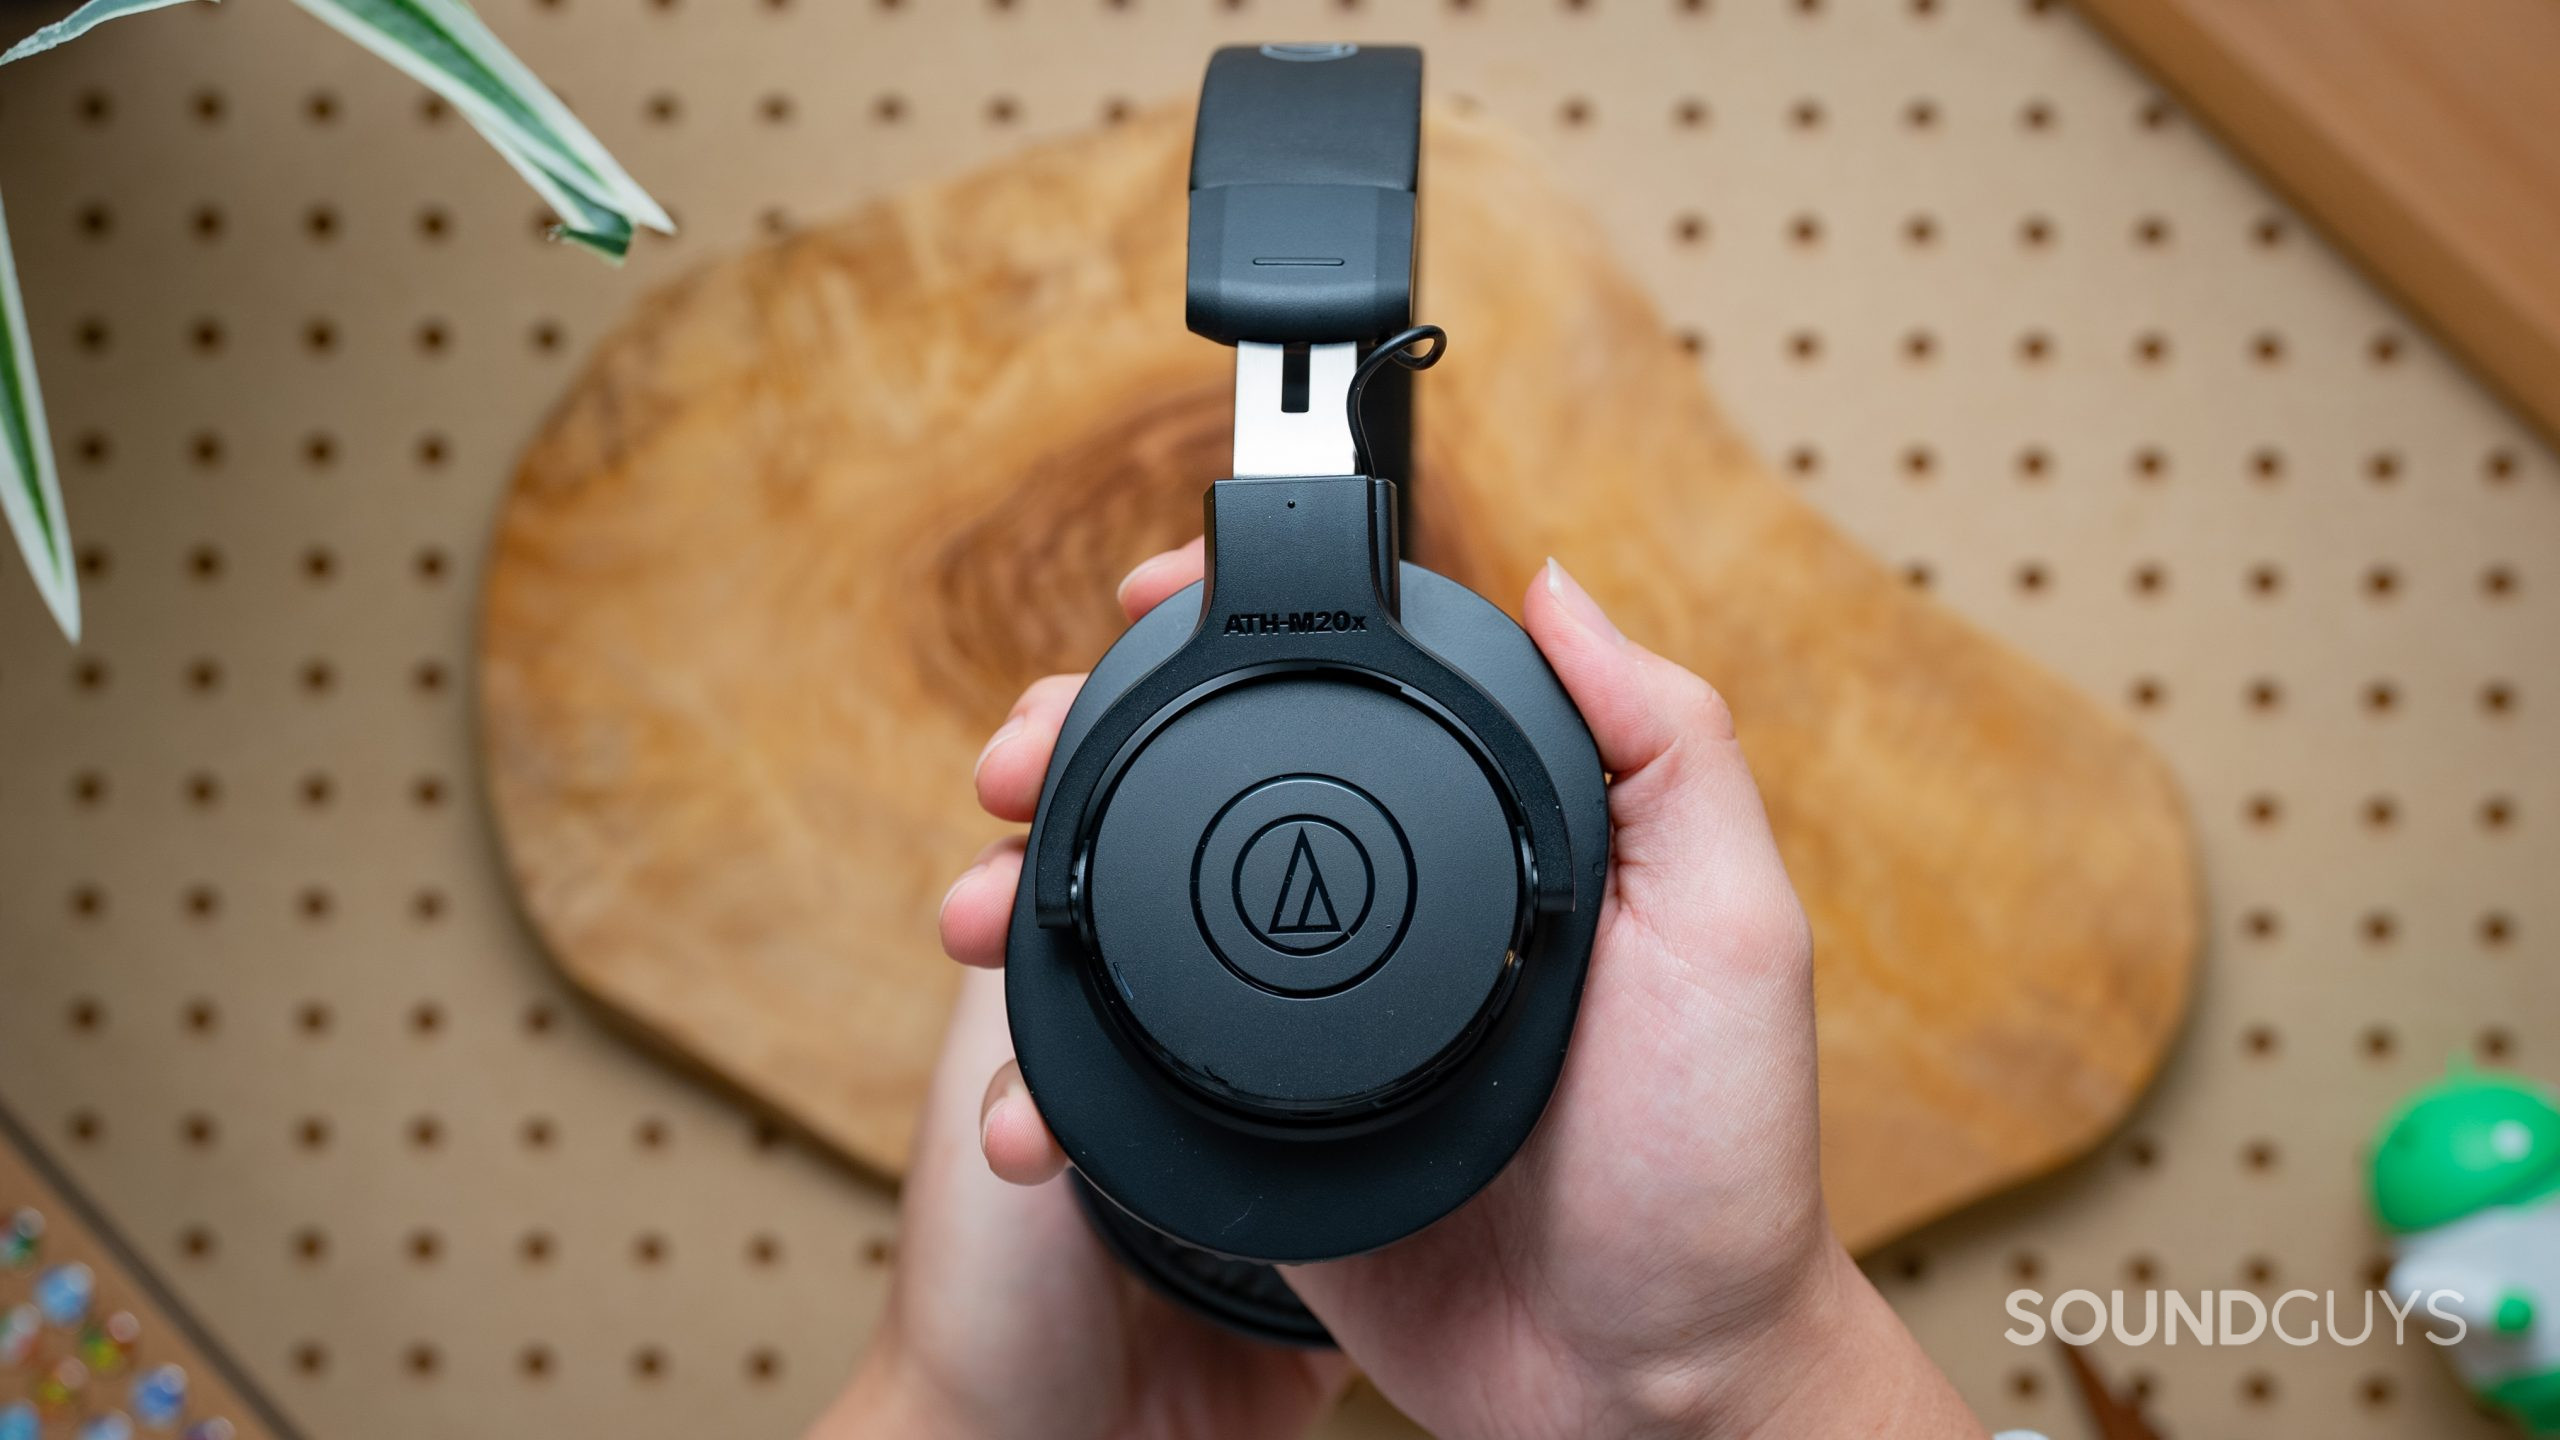 A hand holds the Audio-Technica ATH-M20xBT shown from the side.